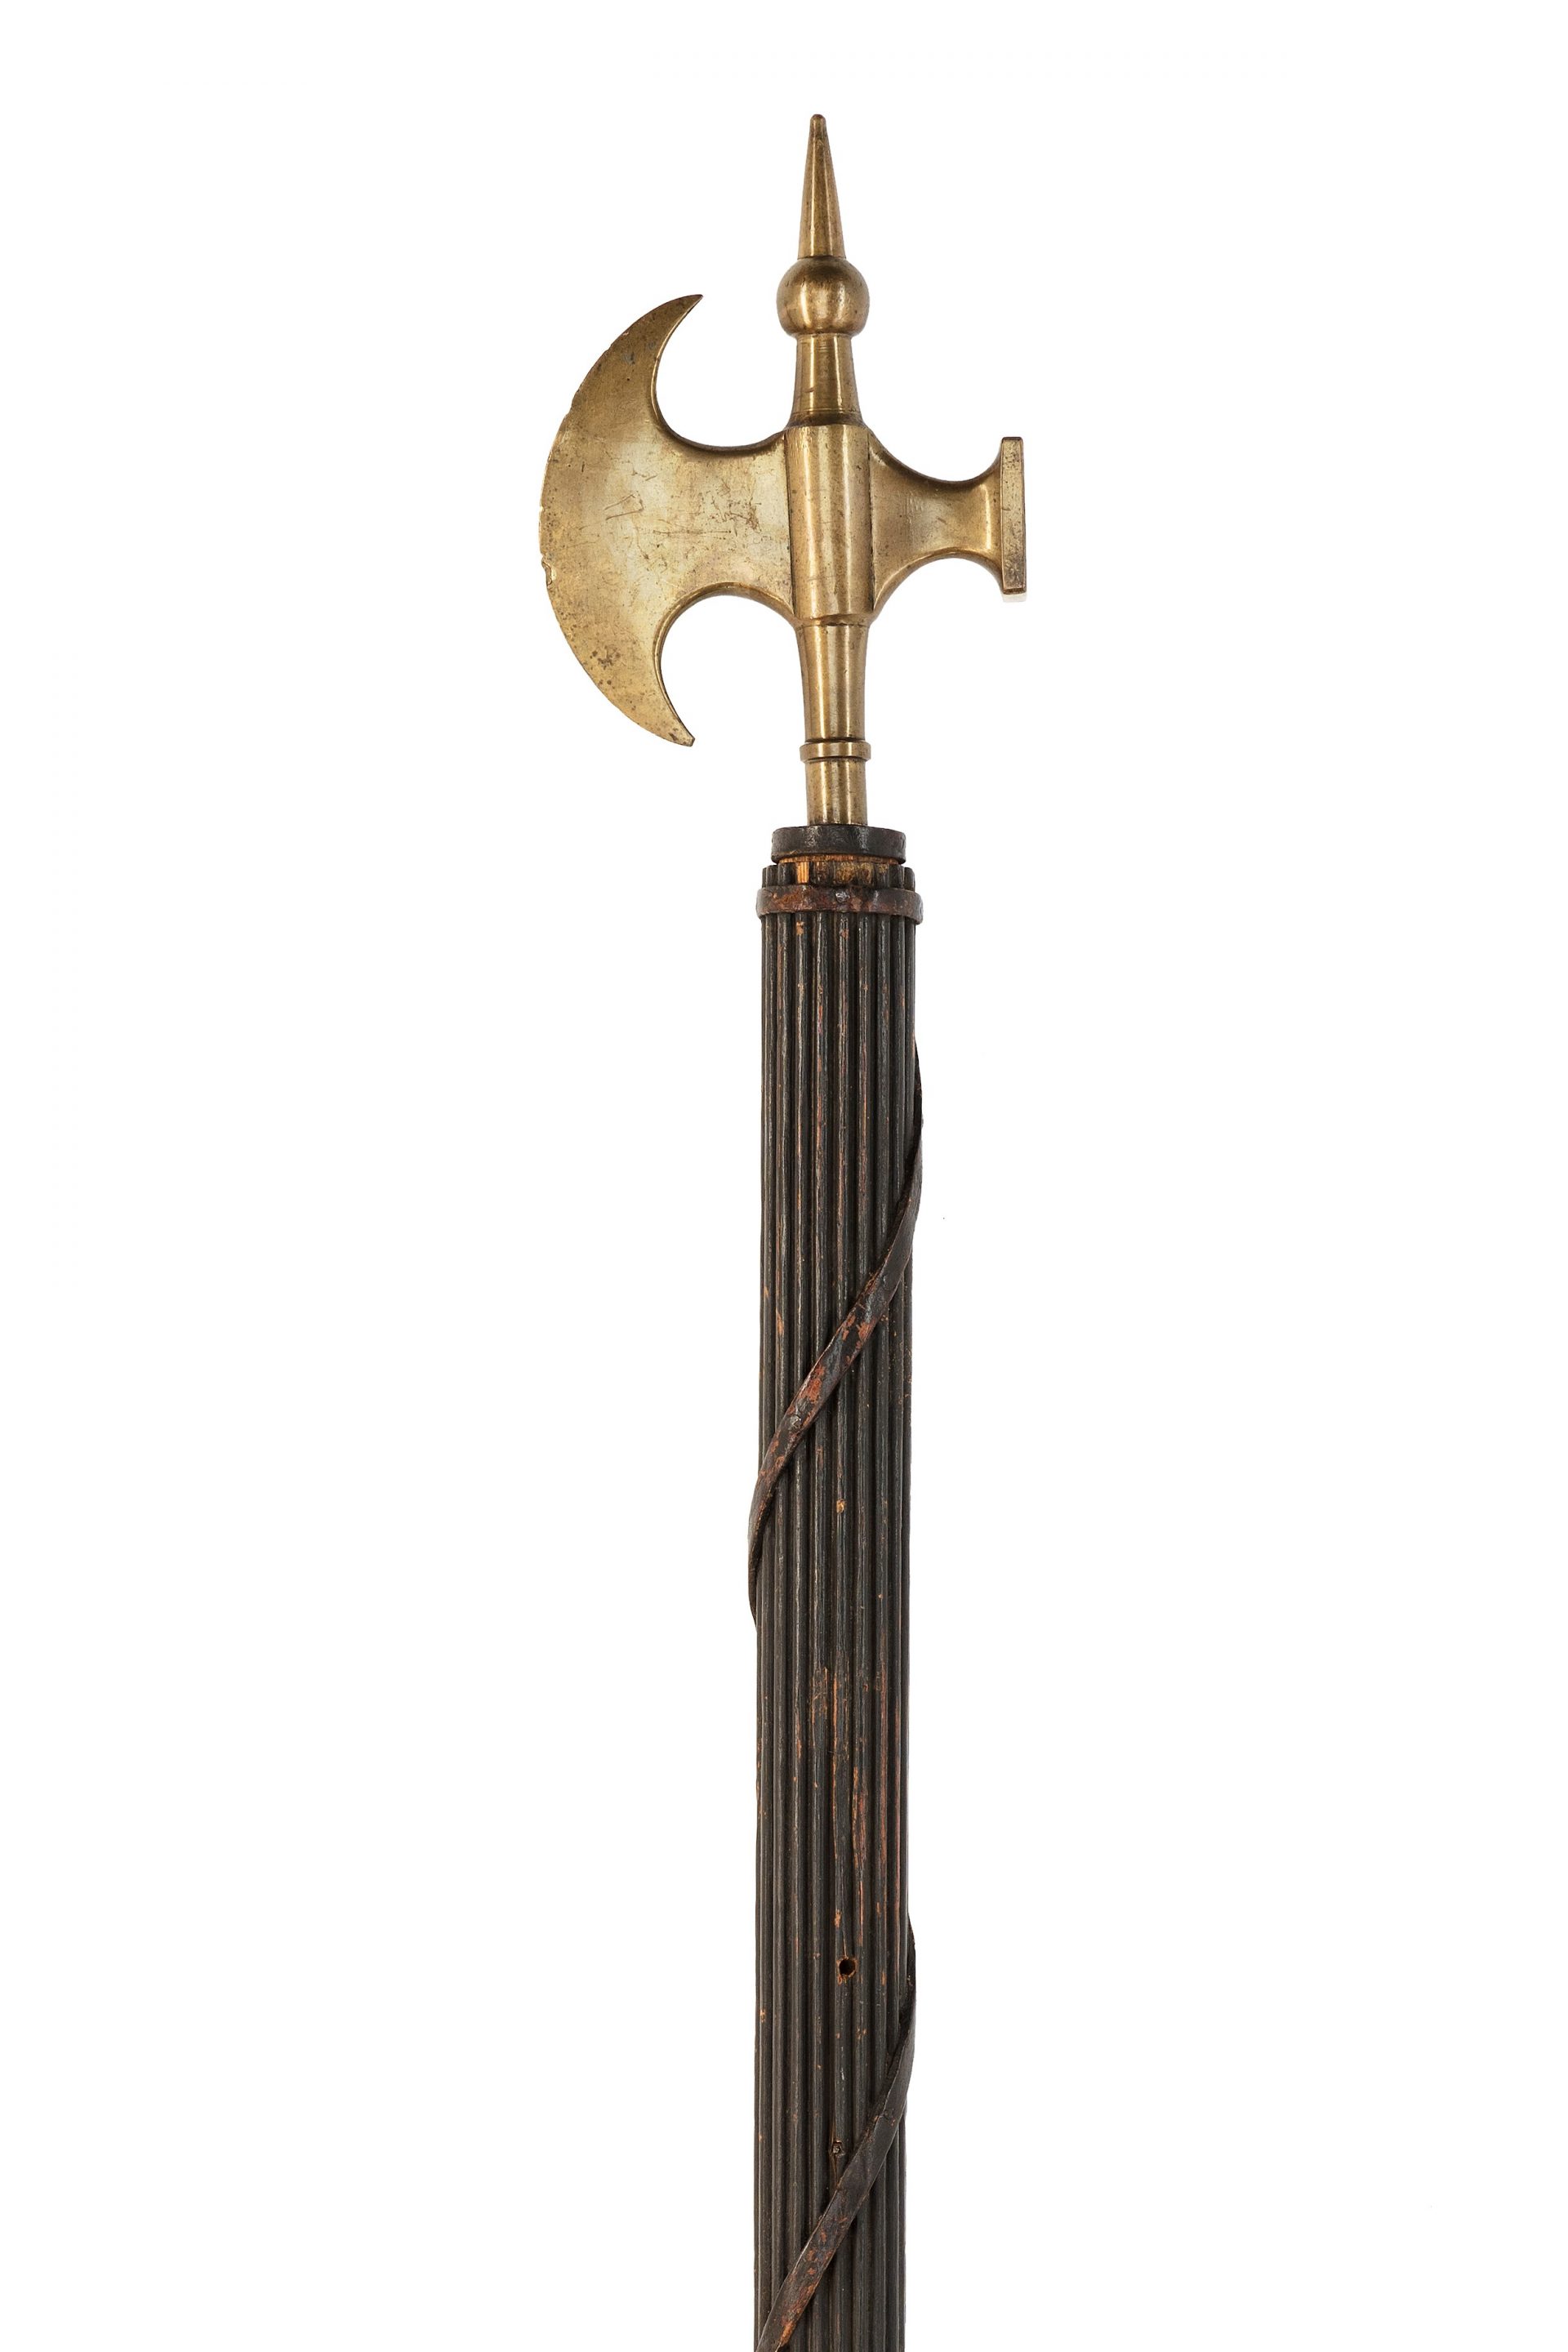 A pole arm of wood and brass.